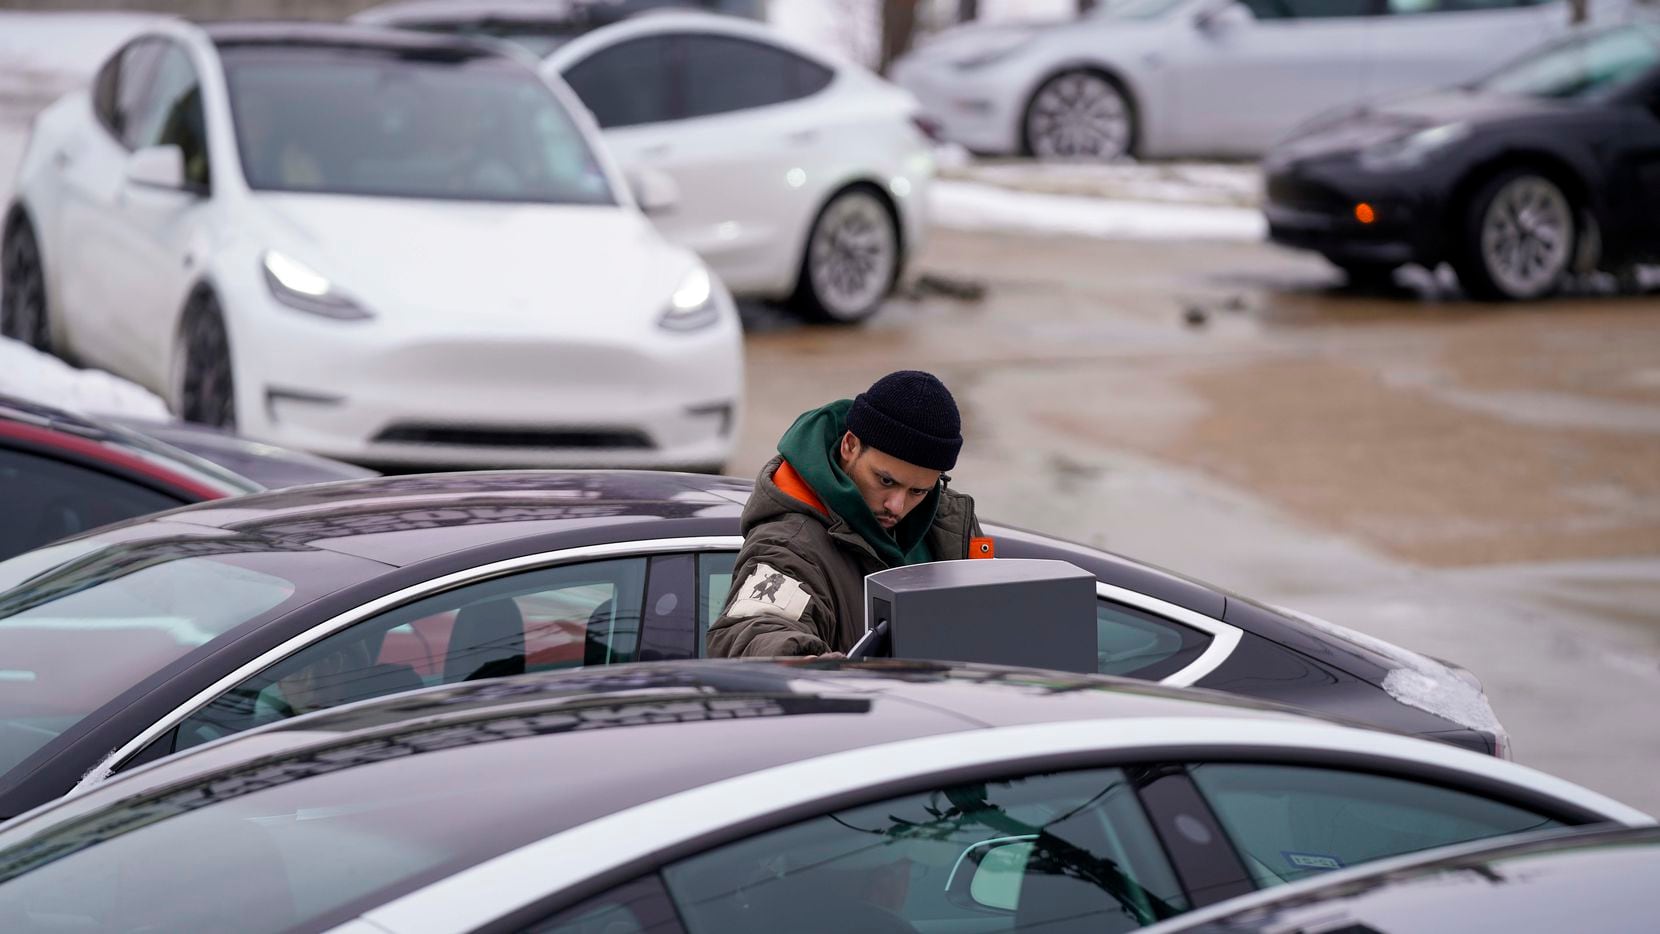 A line of cars waits for a charging station at the Tesla Supercharger on North Central Expressway near Walnut Hill on Tuesday, Feb. 16, 2021, in Dallas. More than 4 million Texans, many of them in North Texas, are fighting extended power outages. Another winter storm could dump 5 more inches of snow on Dallas-Fort Worth. (Smiley N. Pool/The Dallas Morning News)